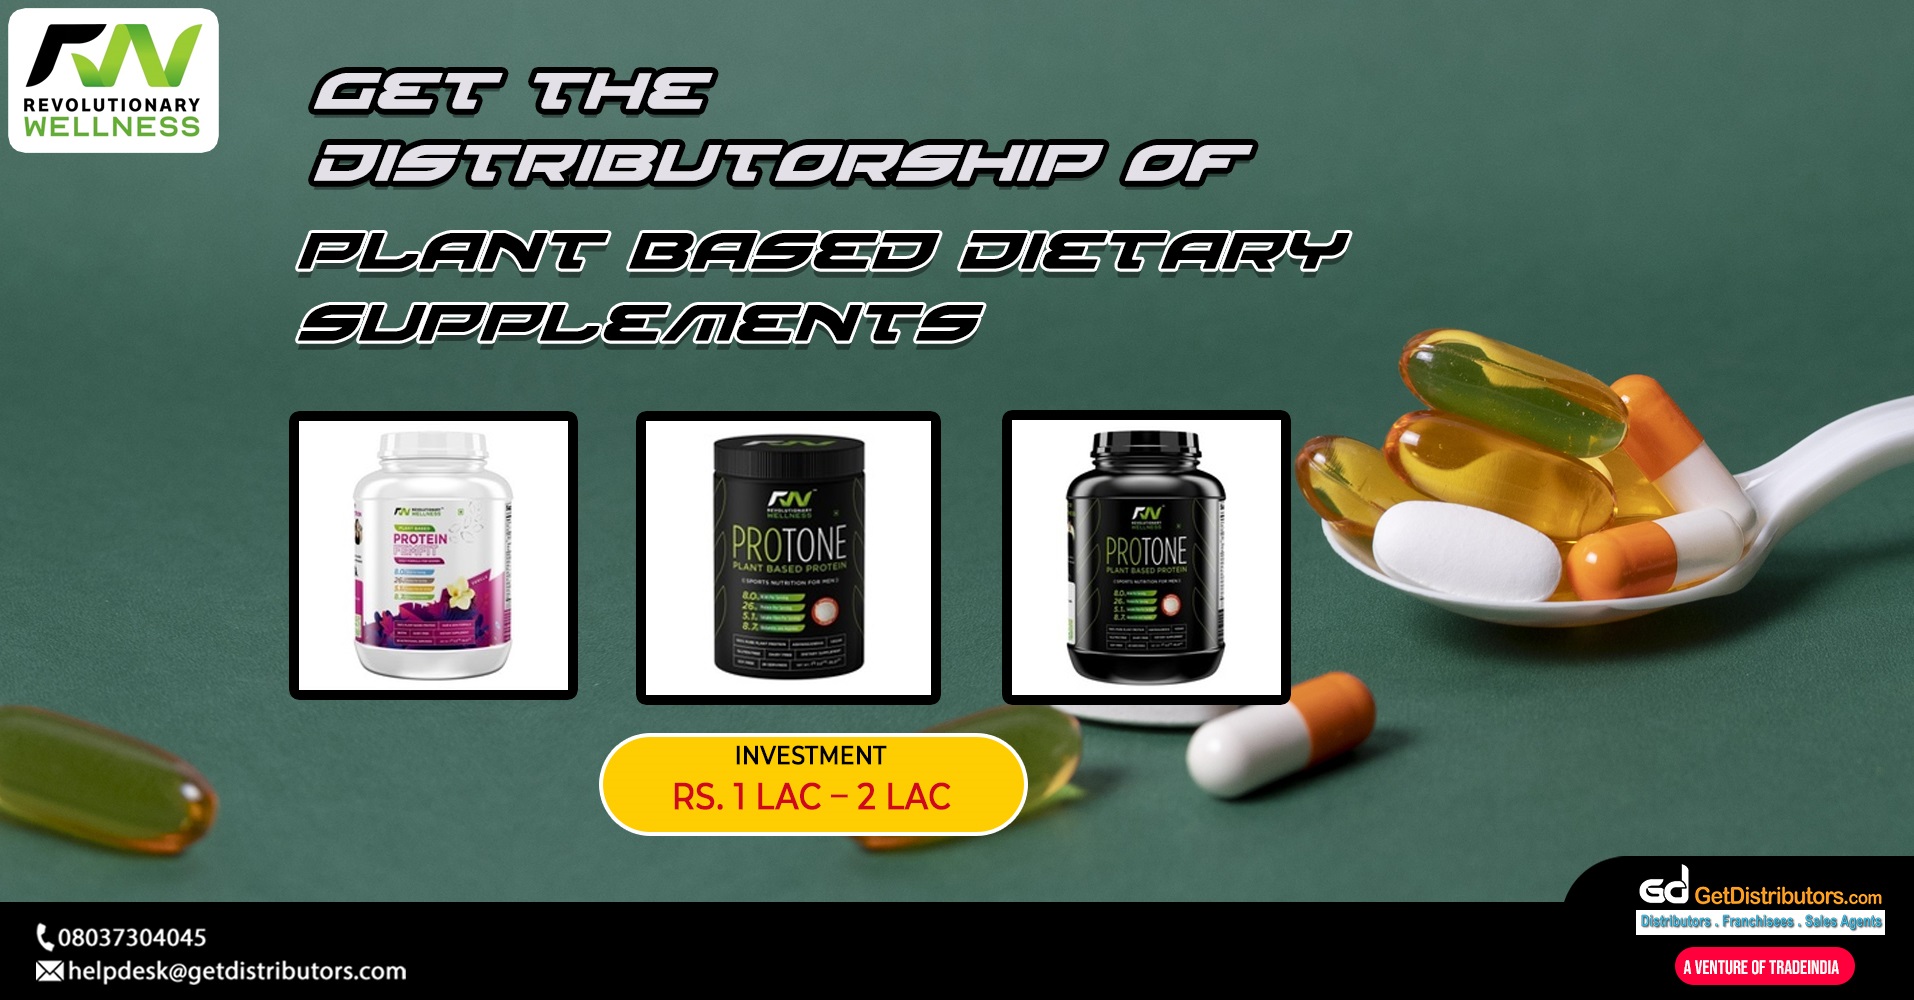 Become a distributor of high-grade plant based dietary supplements